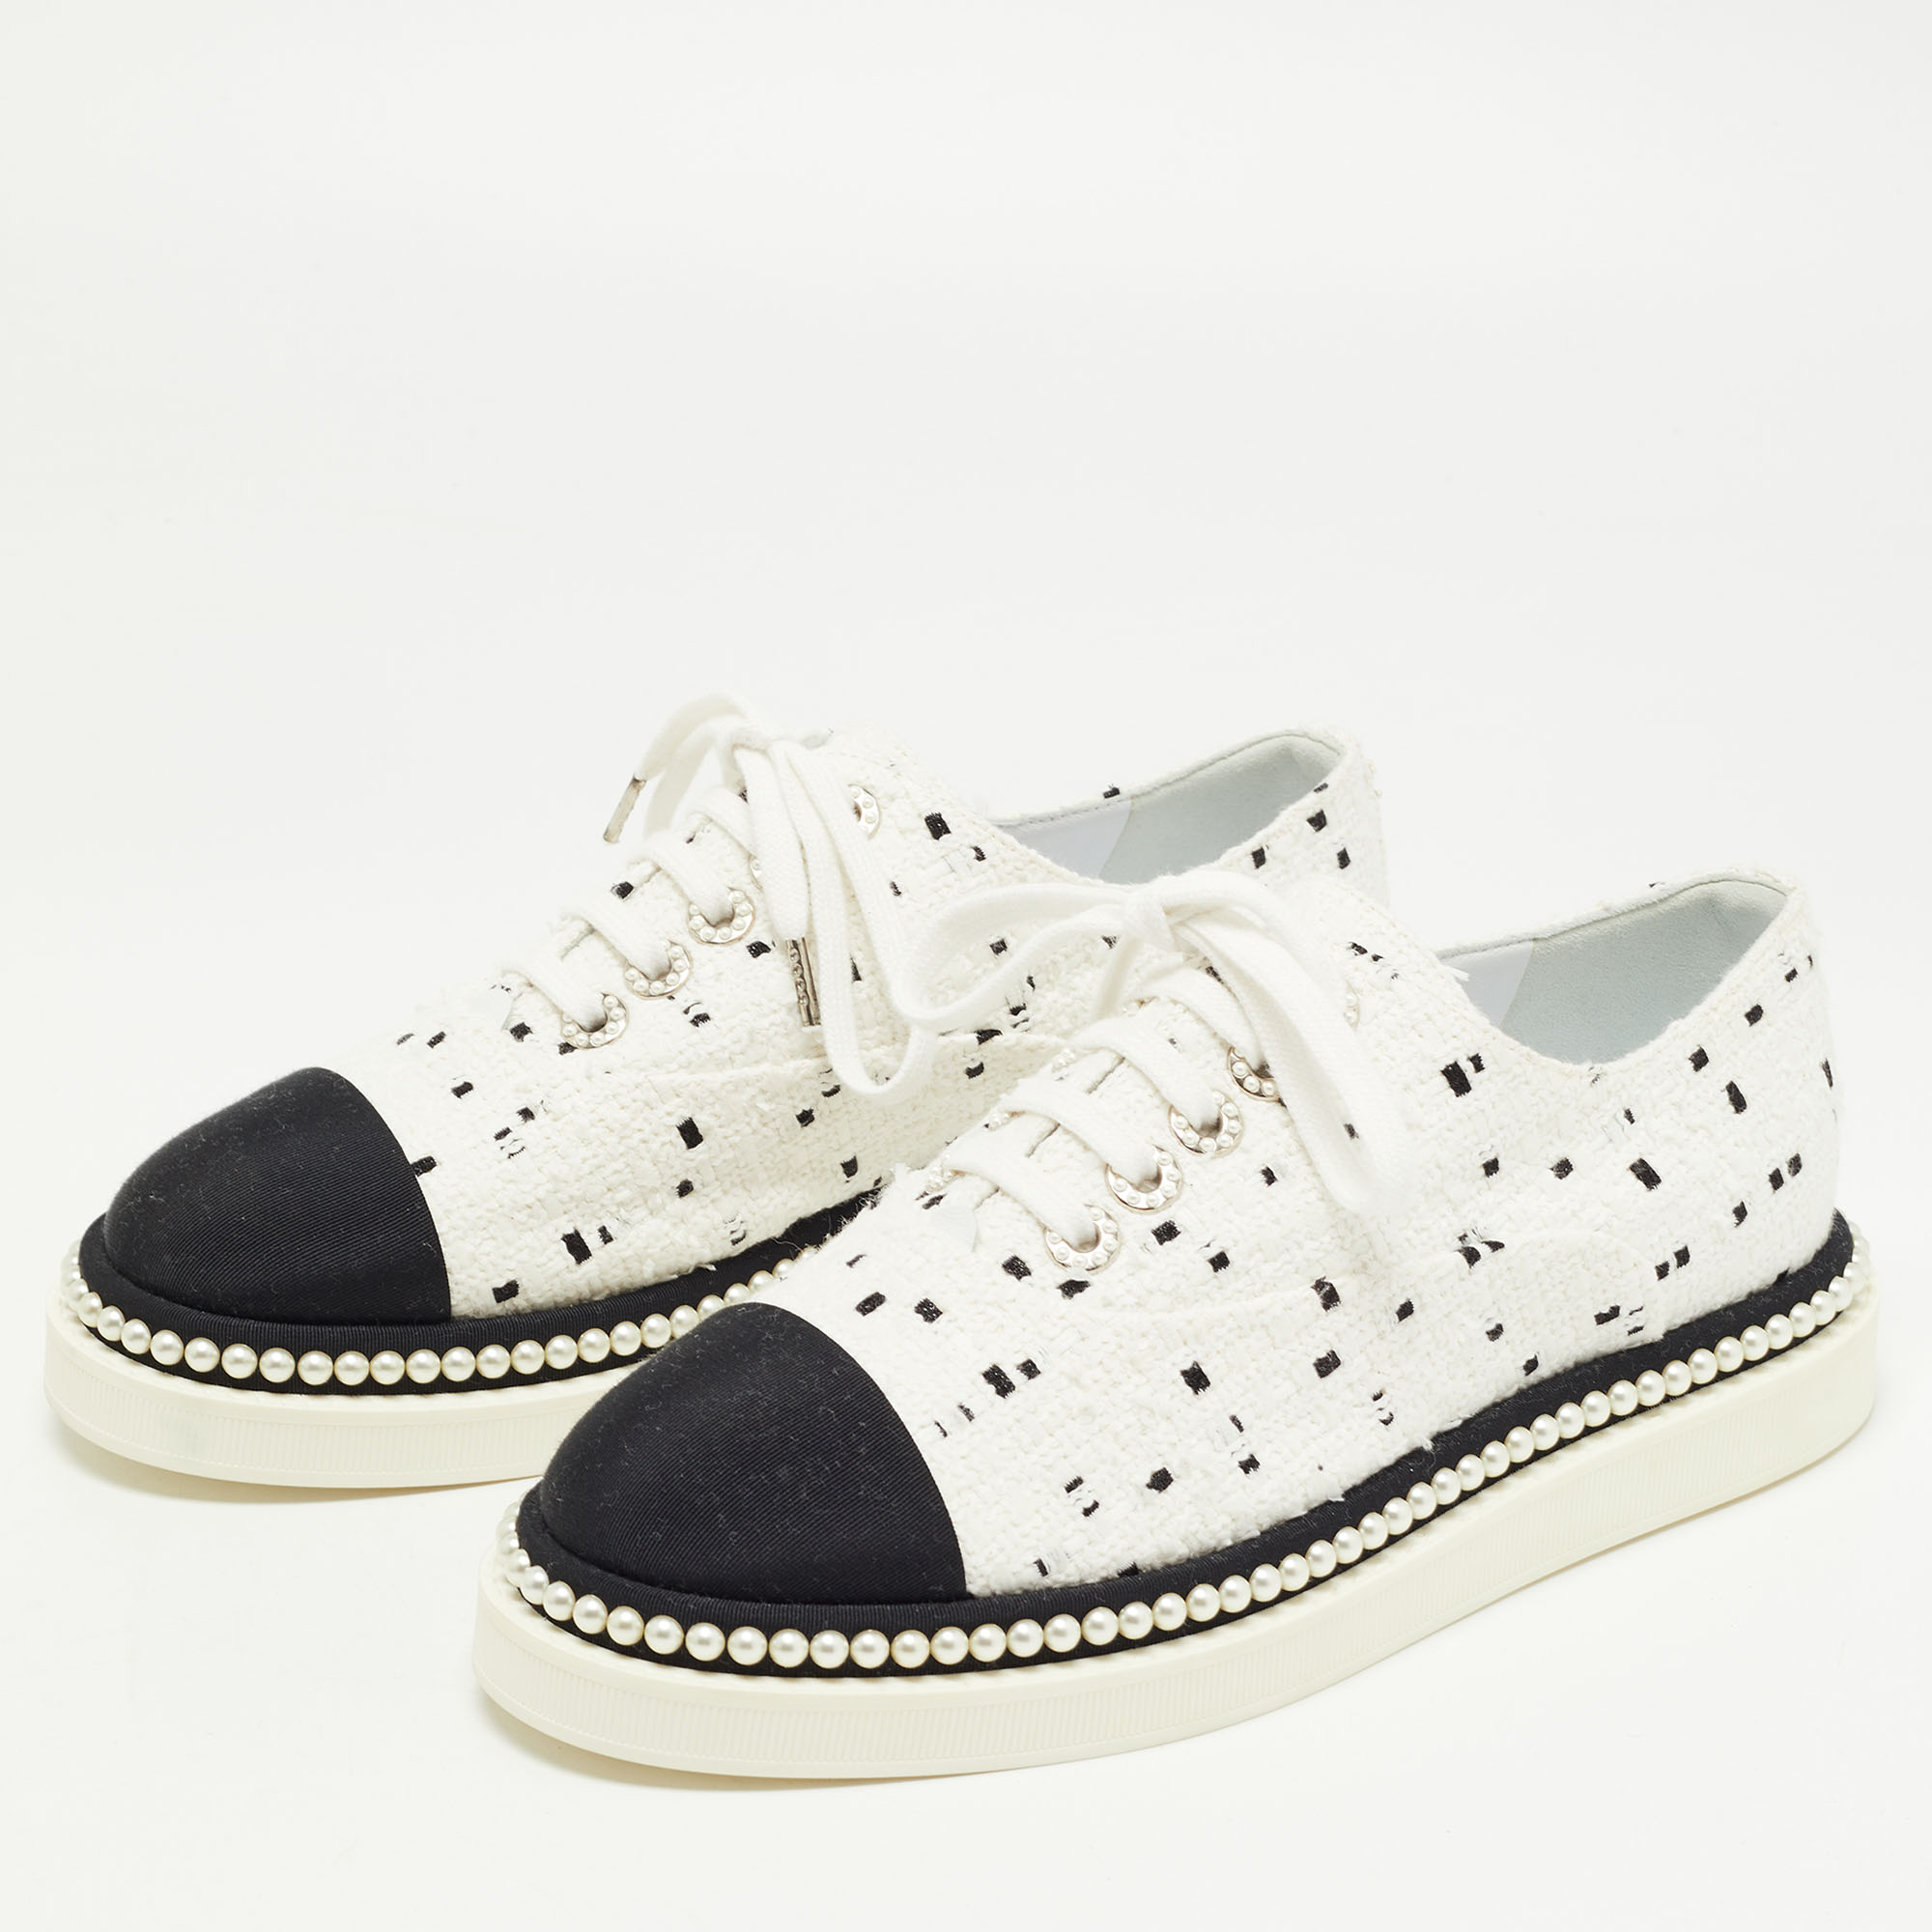 

Chanel Monochrome Tweed and Canvas Cap Toe Faux Pearl Trim Oxfords Sneakers Size, White